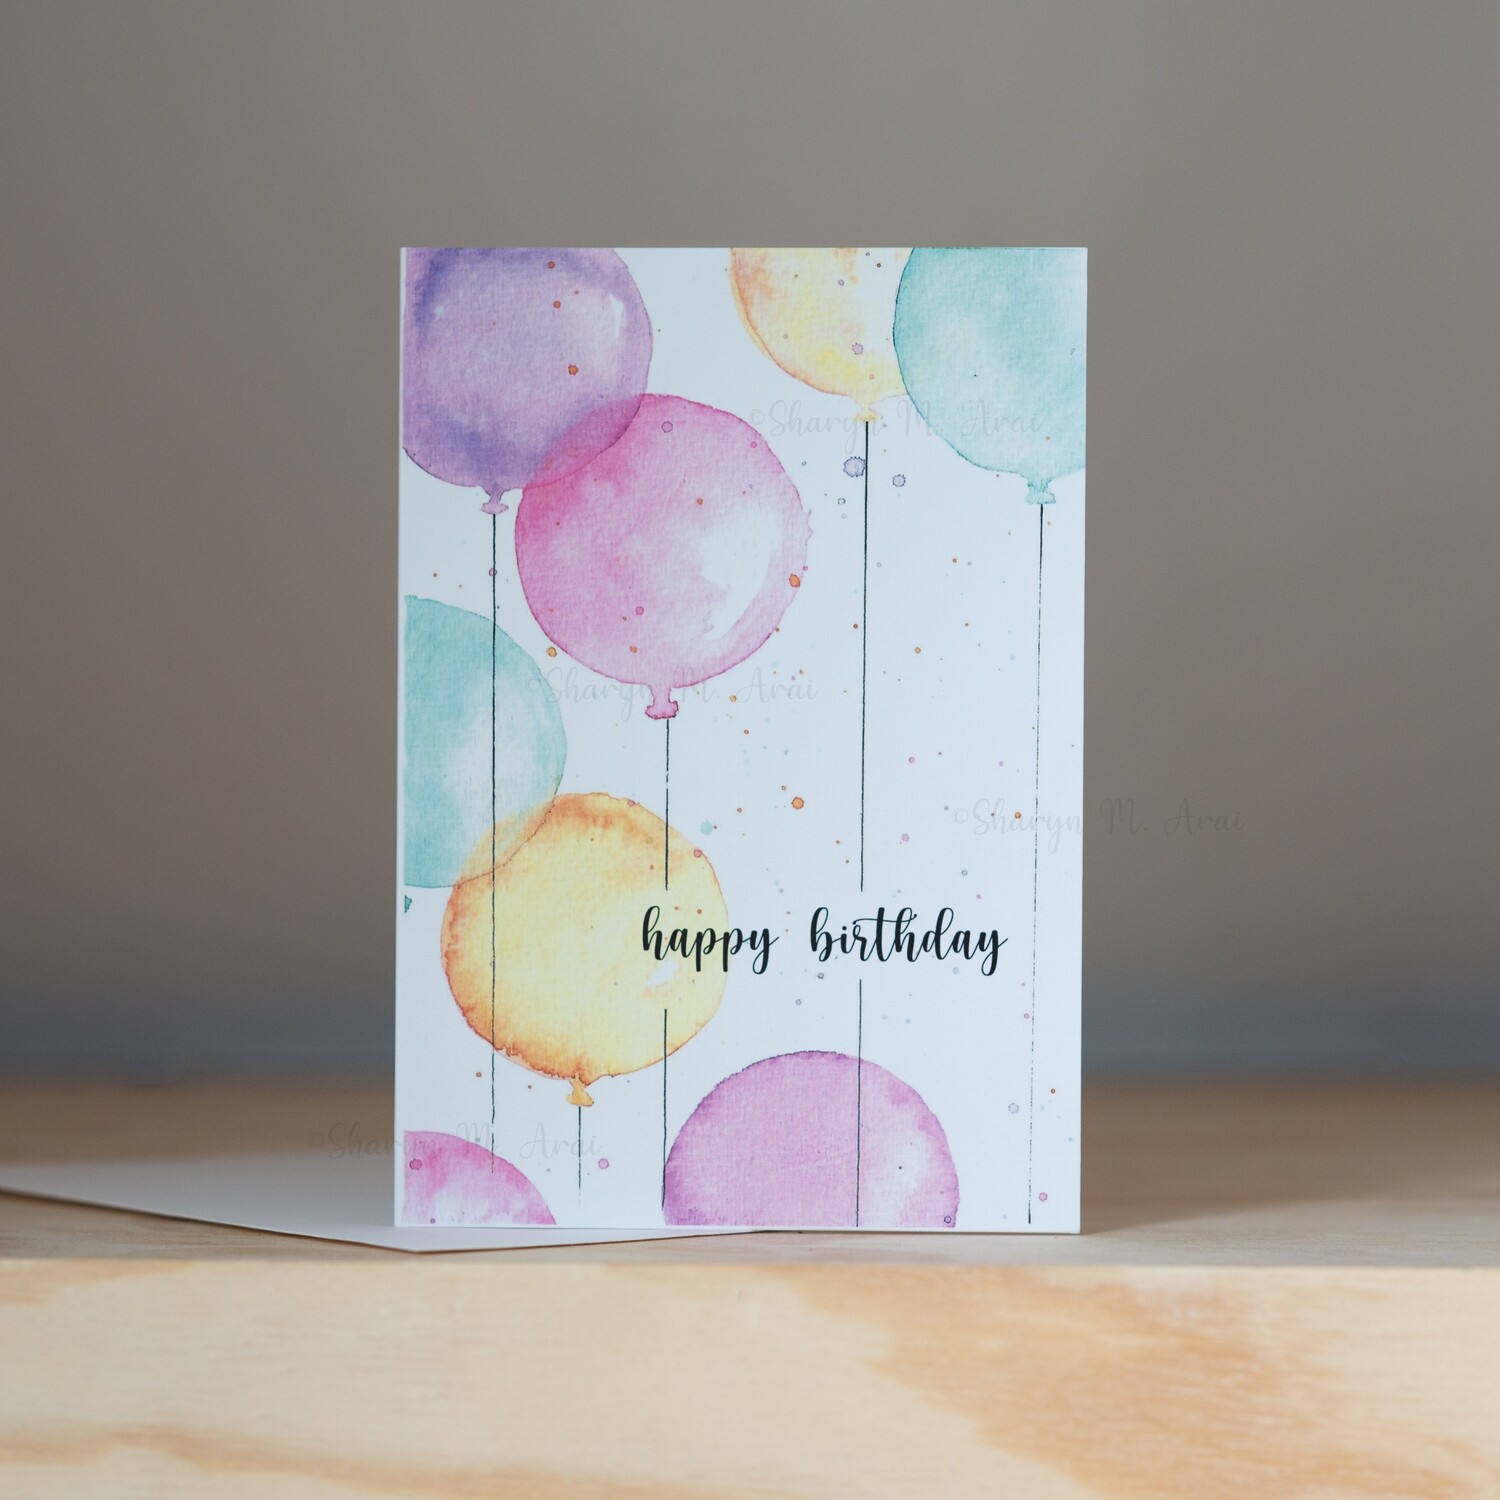 Happy Birthday card with envelope